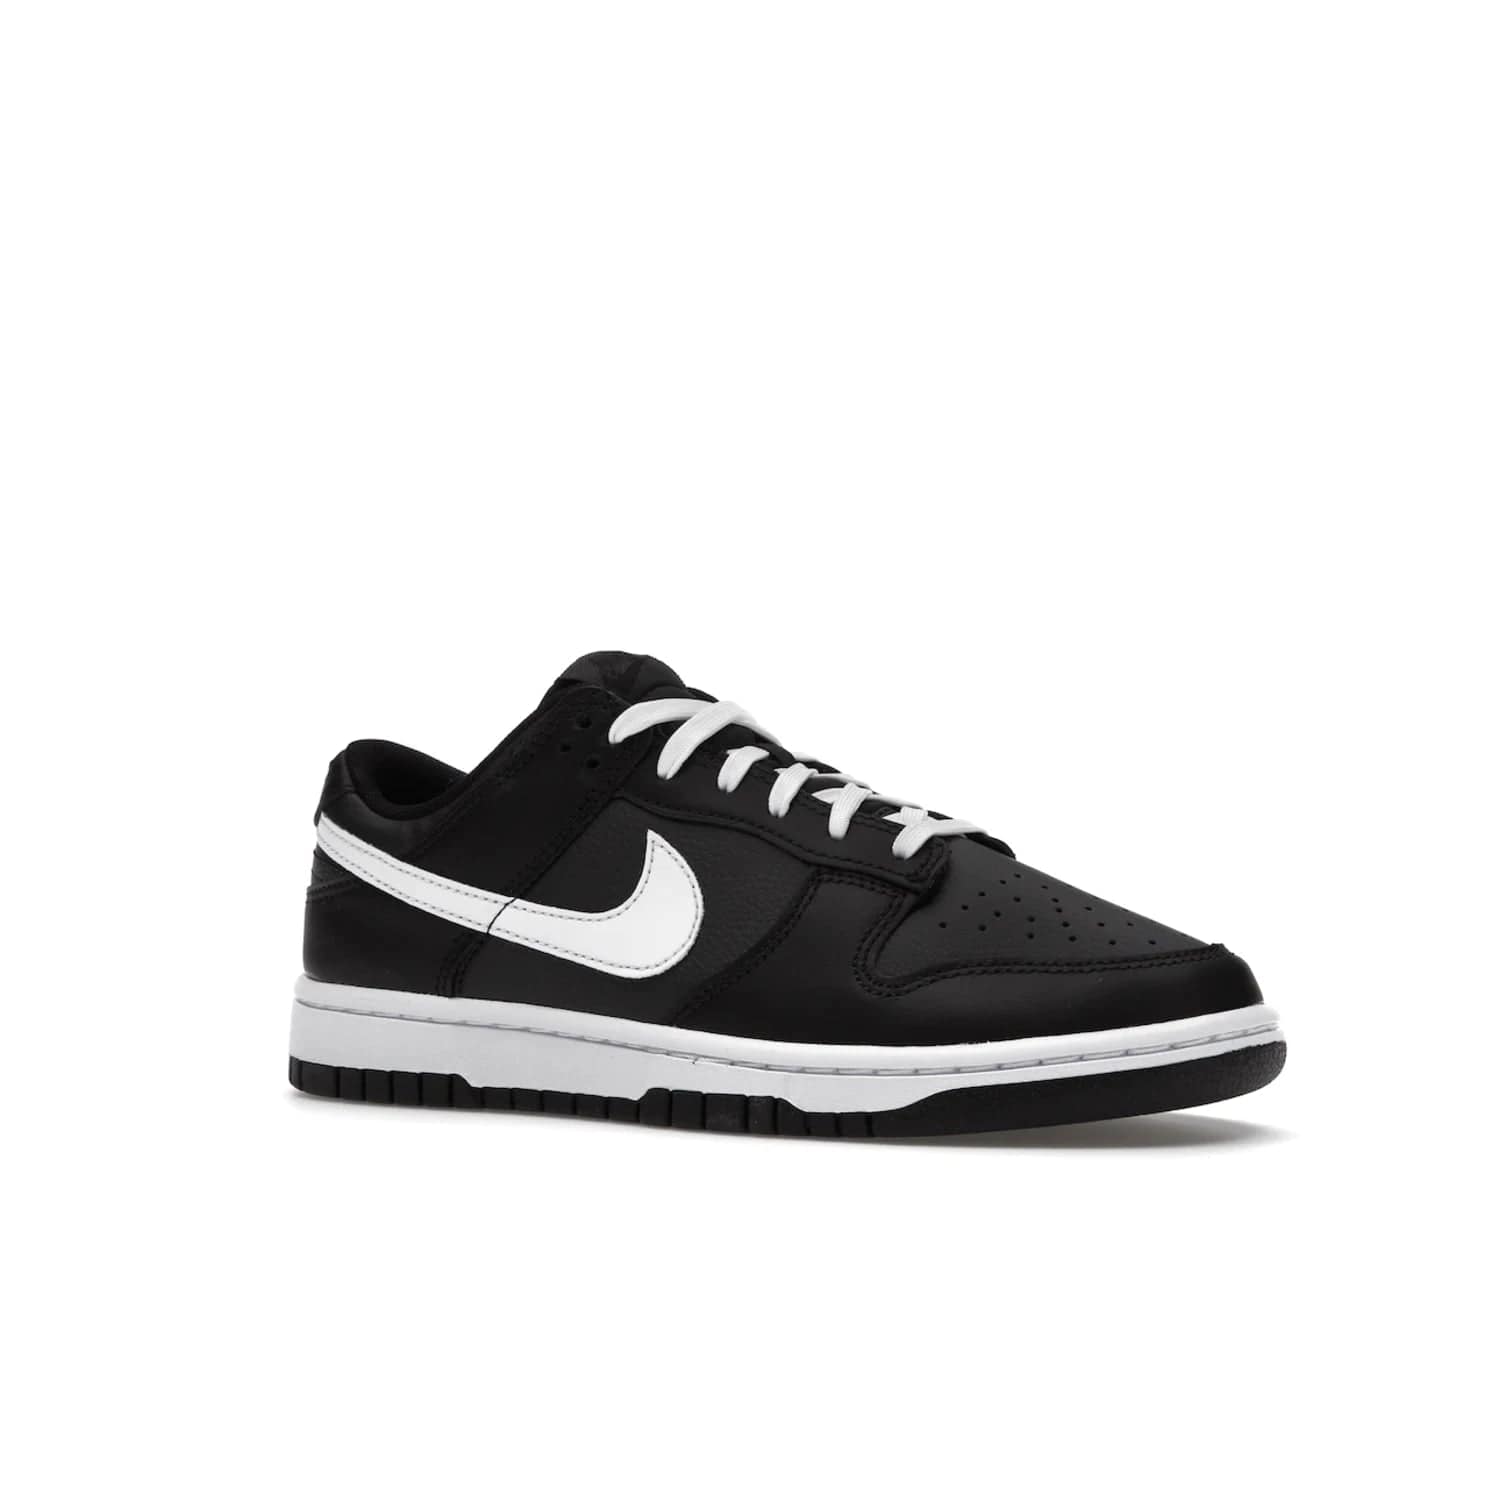 Nike Dunk Low Black White (2022) - Image 4 - Only at www.BallersClubKickz.com - A classic Nike Dunk Low in black and white. Its tumbled leather upper features leather overlays and white Nike Swooshes. The design also includes a woven tongue label and an EVA foam sole for cushioning and support. An effortlessly stylish and timeless look. The Nike Dunk Low Black White (2022) released in May. Step out in style.